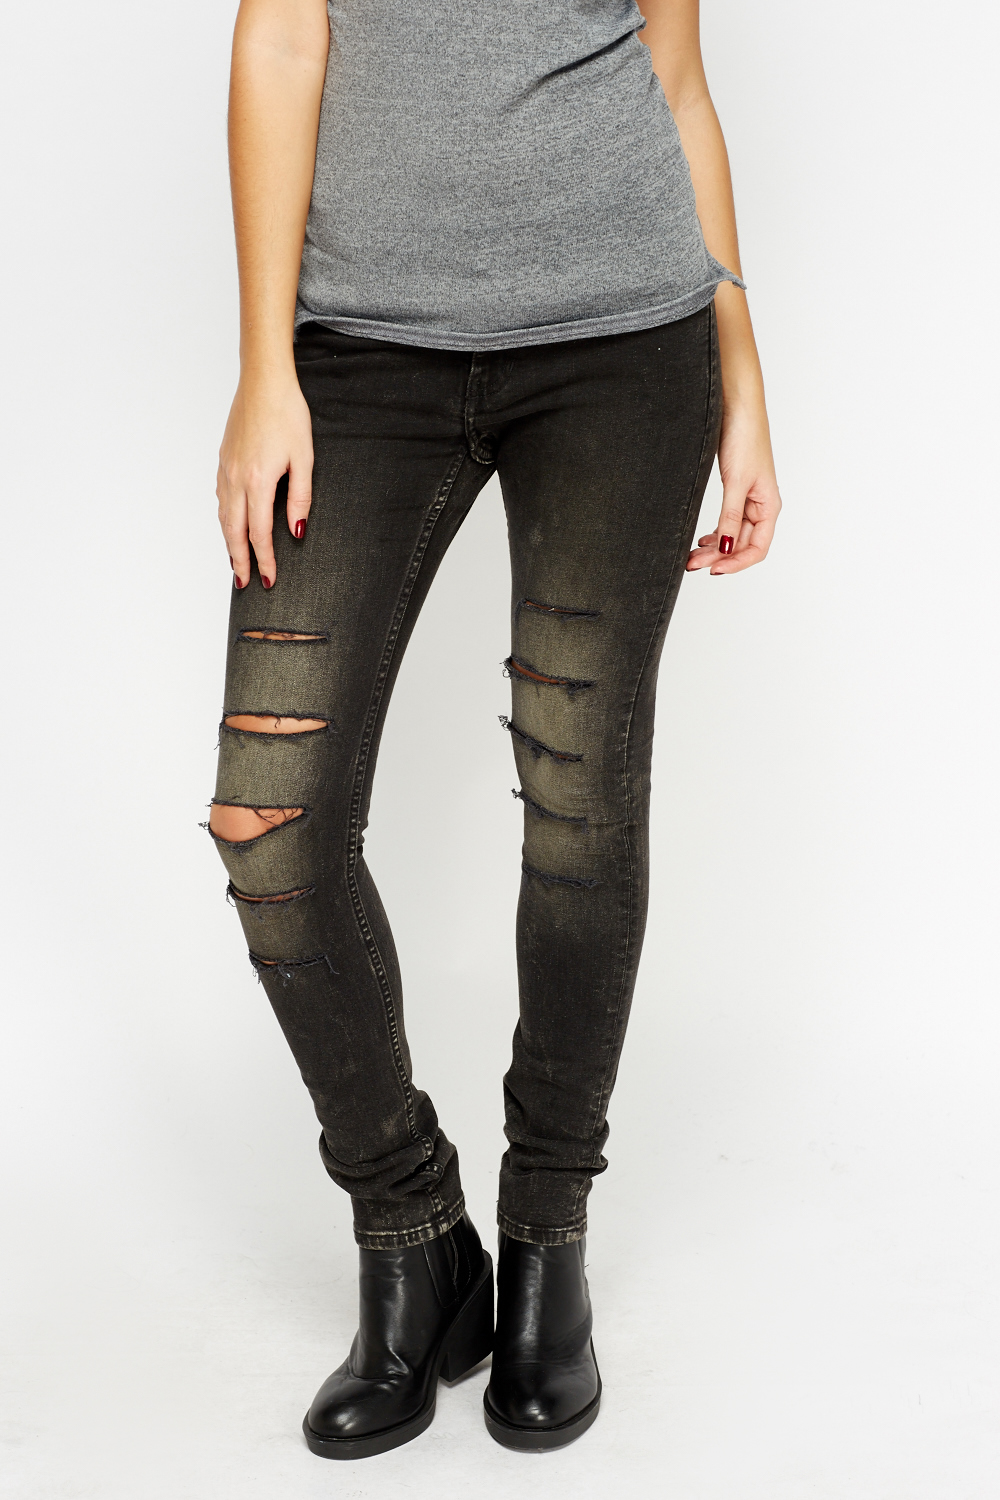 woman wearing black ripped skinny jeans with a black crop top and heels